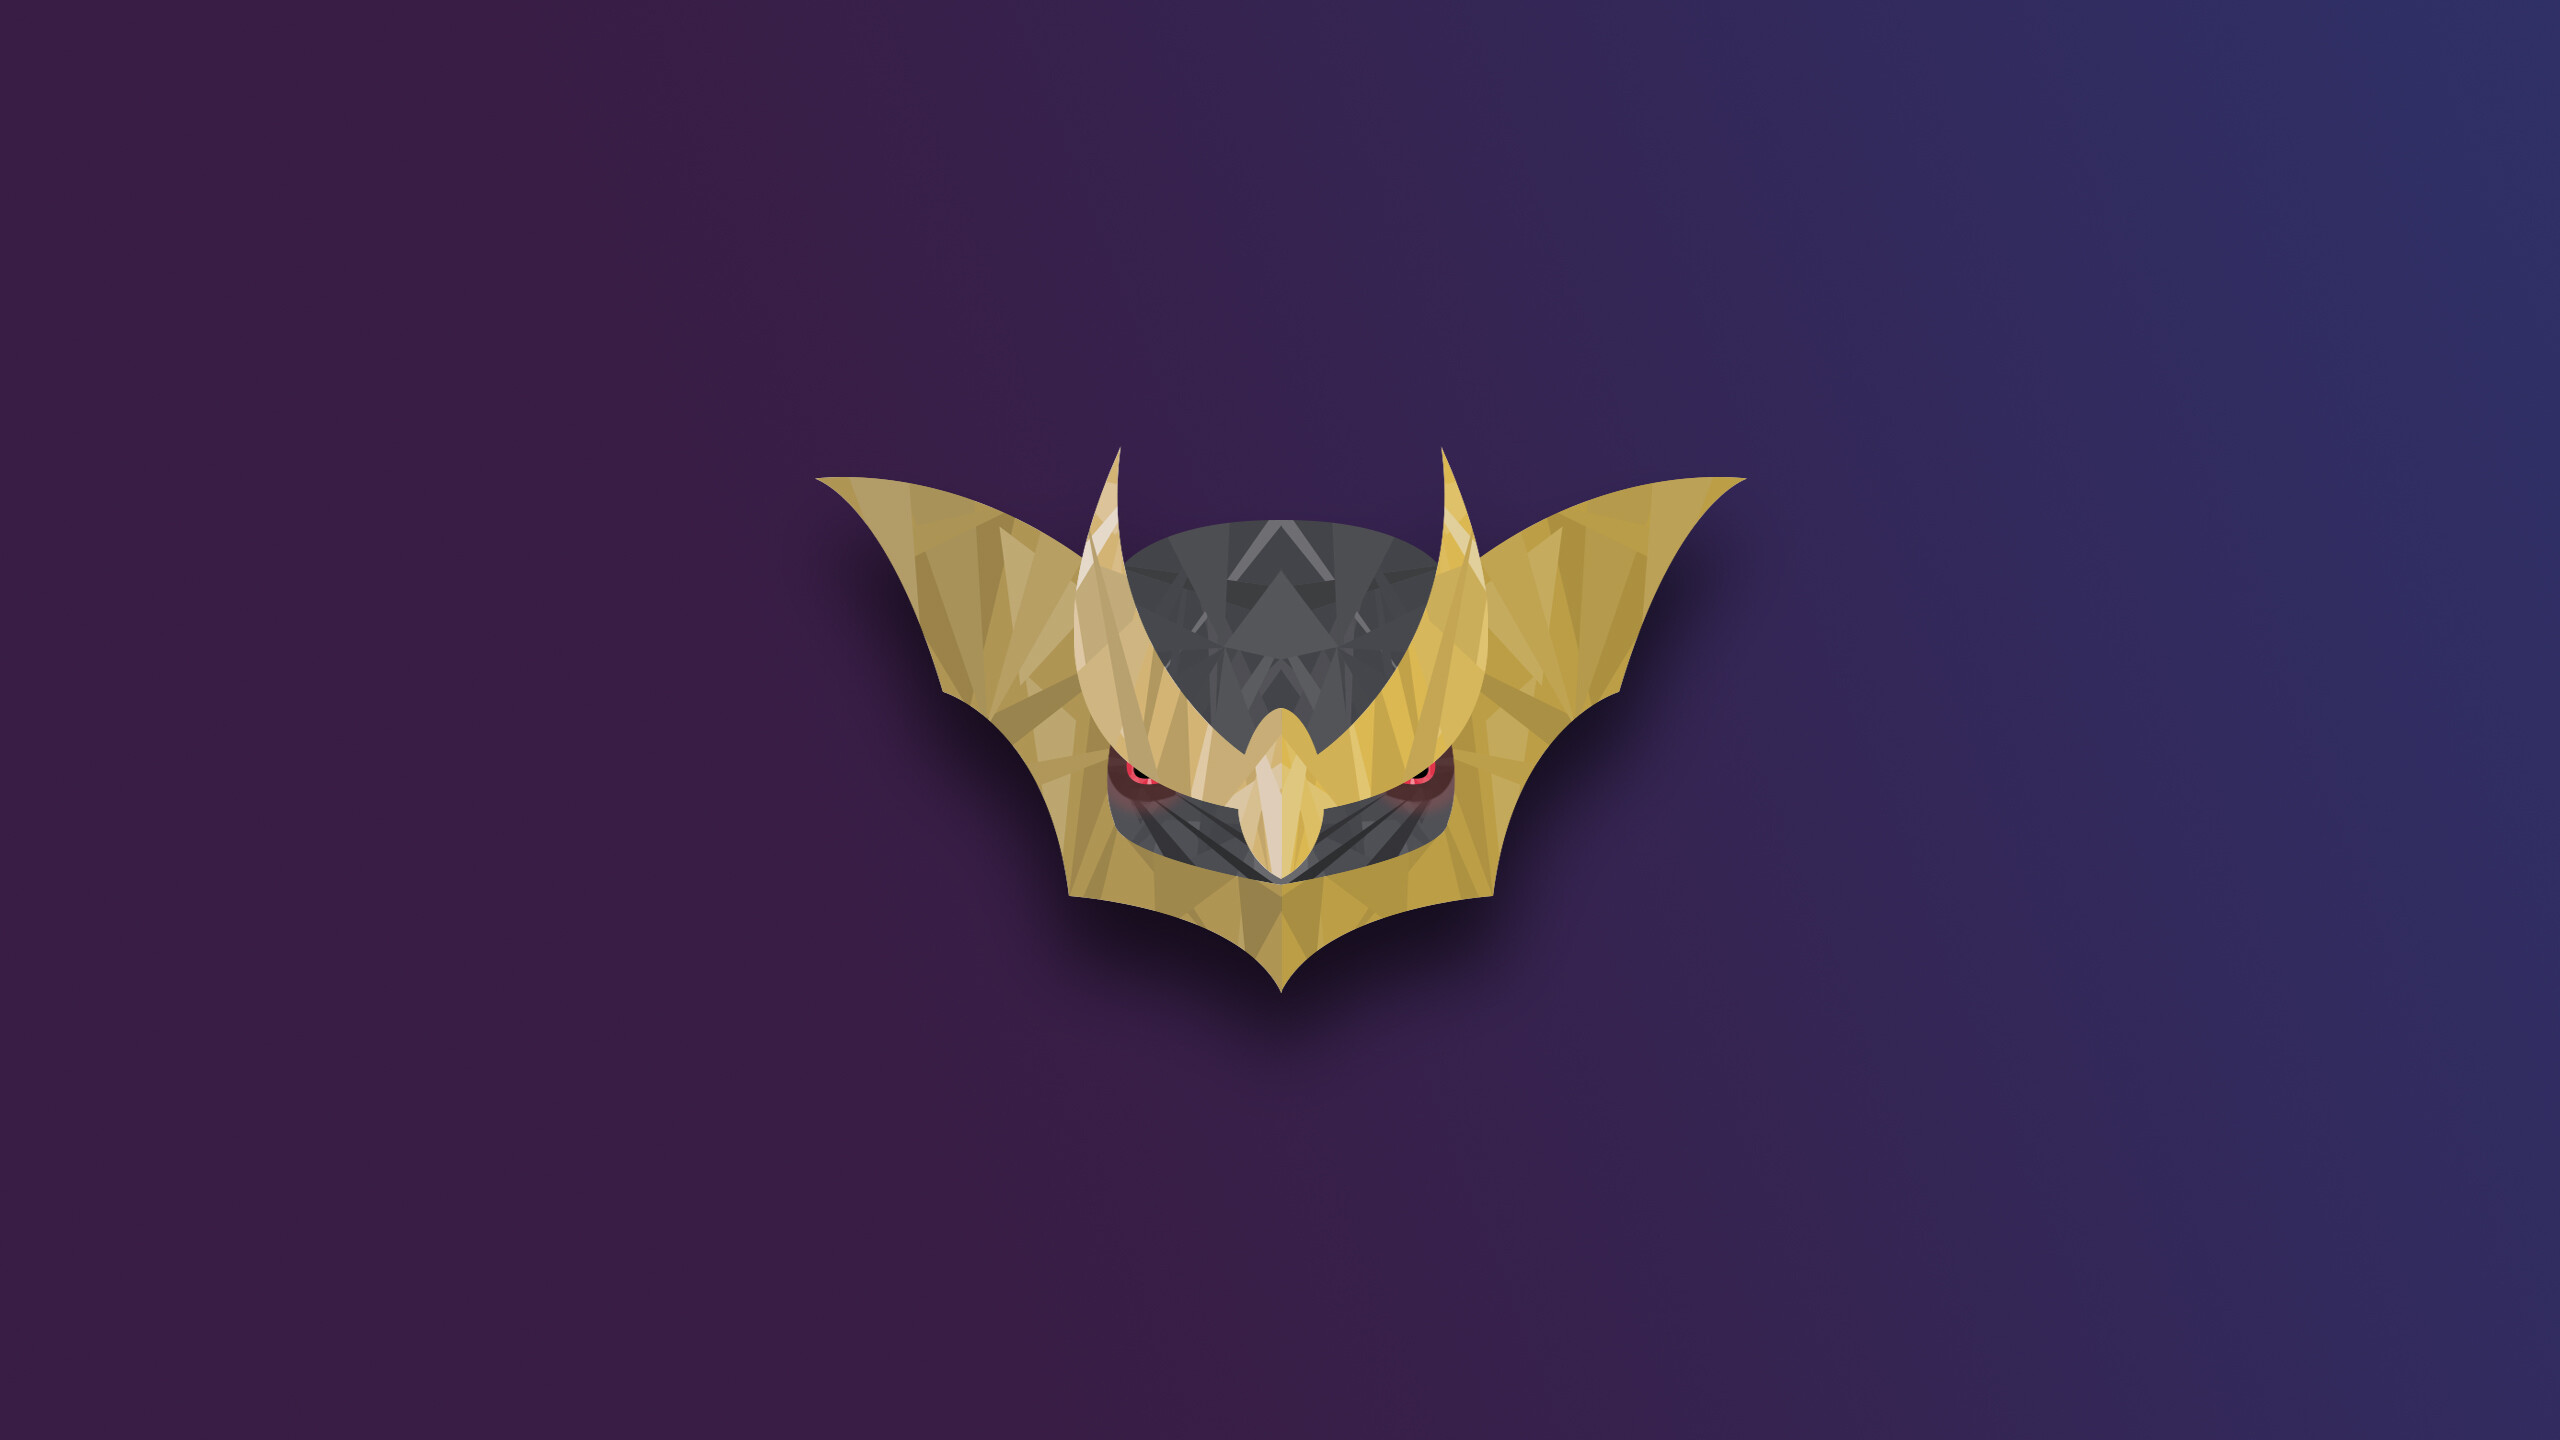 Giratina: Renegade Pokemon, Not known to evolve to or from any other Pokemon, Minimalistic. 2560x1440 HD Background.